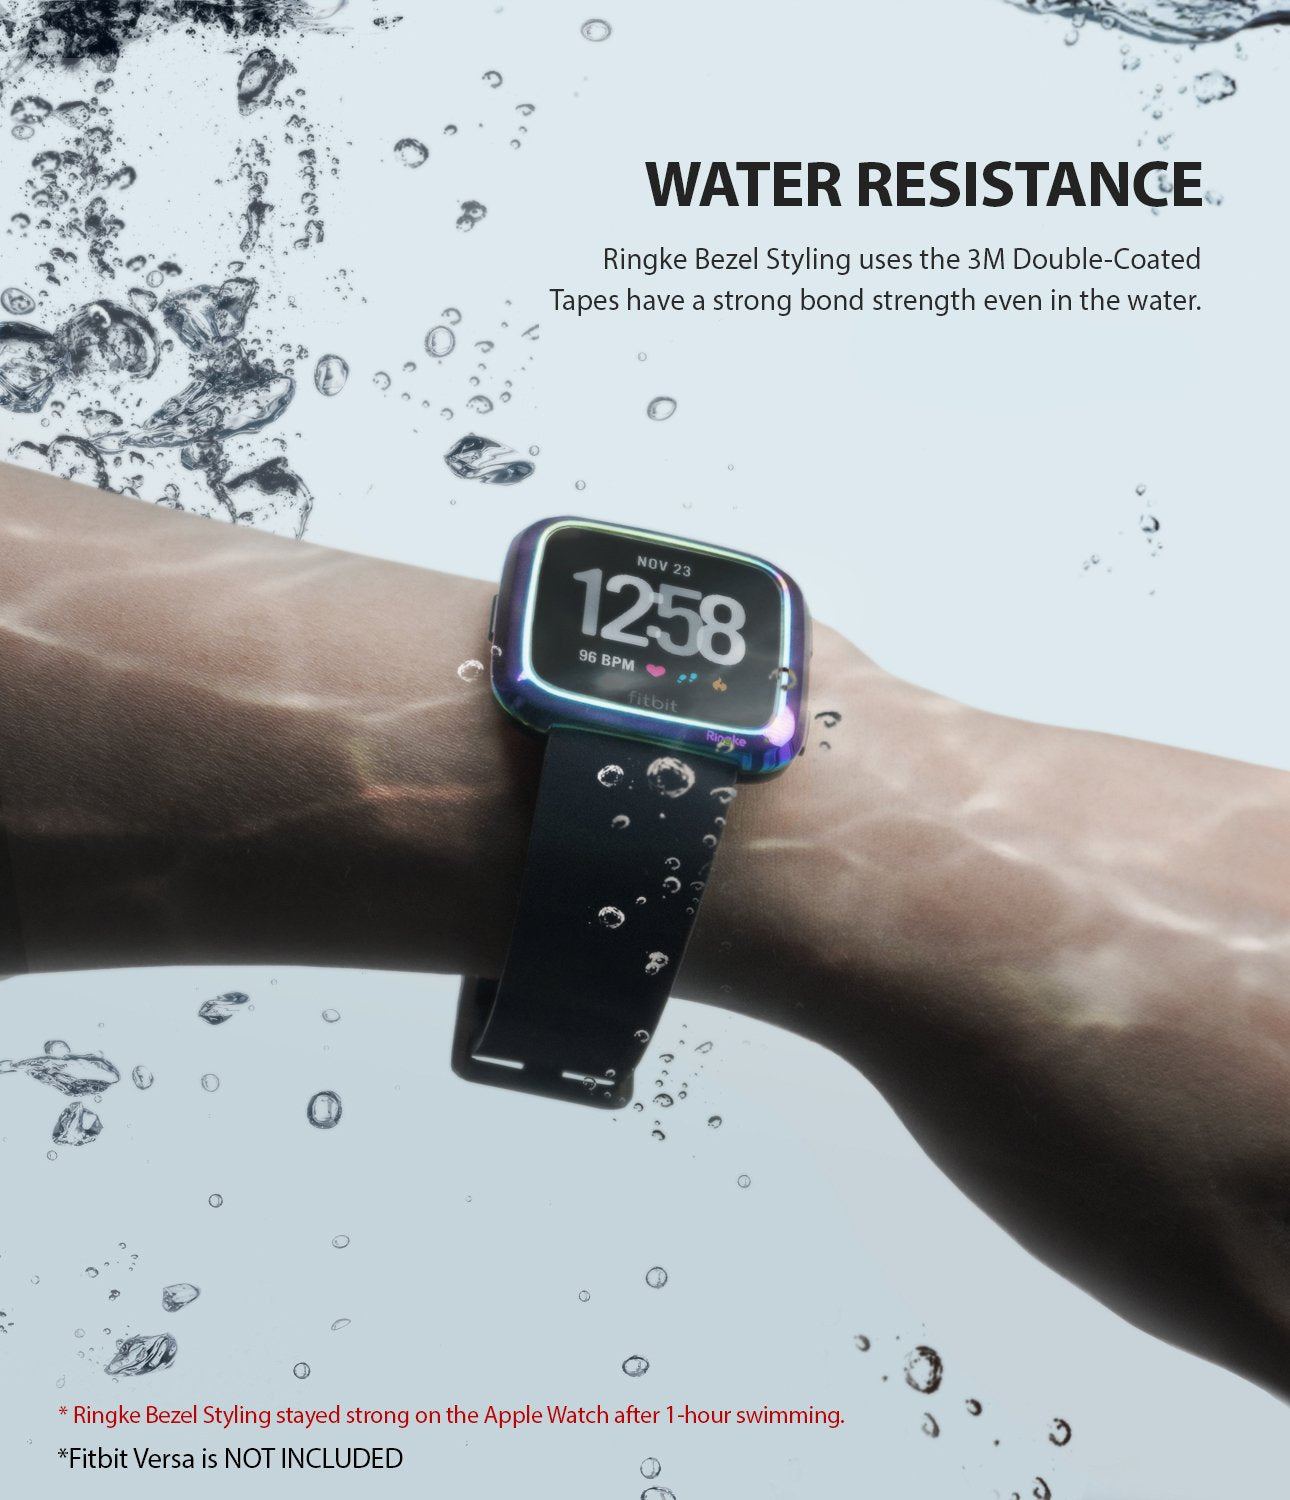 Ringke Bezel Styling Designed for Fitbit Versa Case Cover, Neo Ghrome- FW-V-08, water resistance